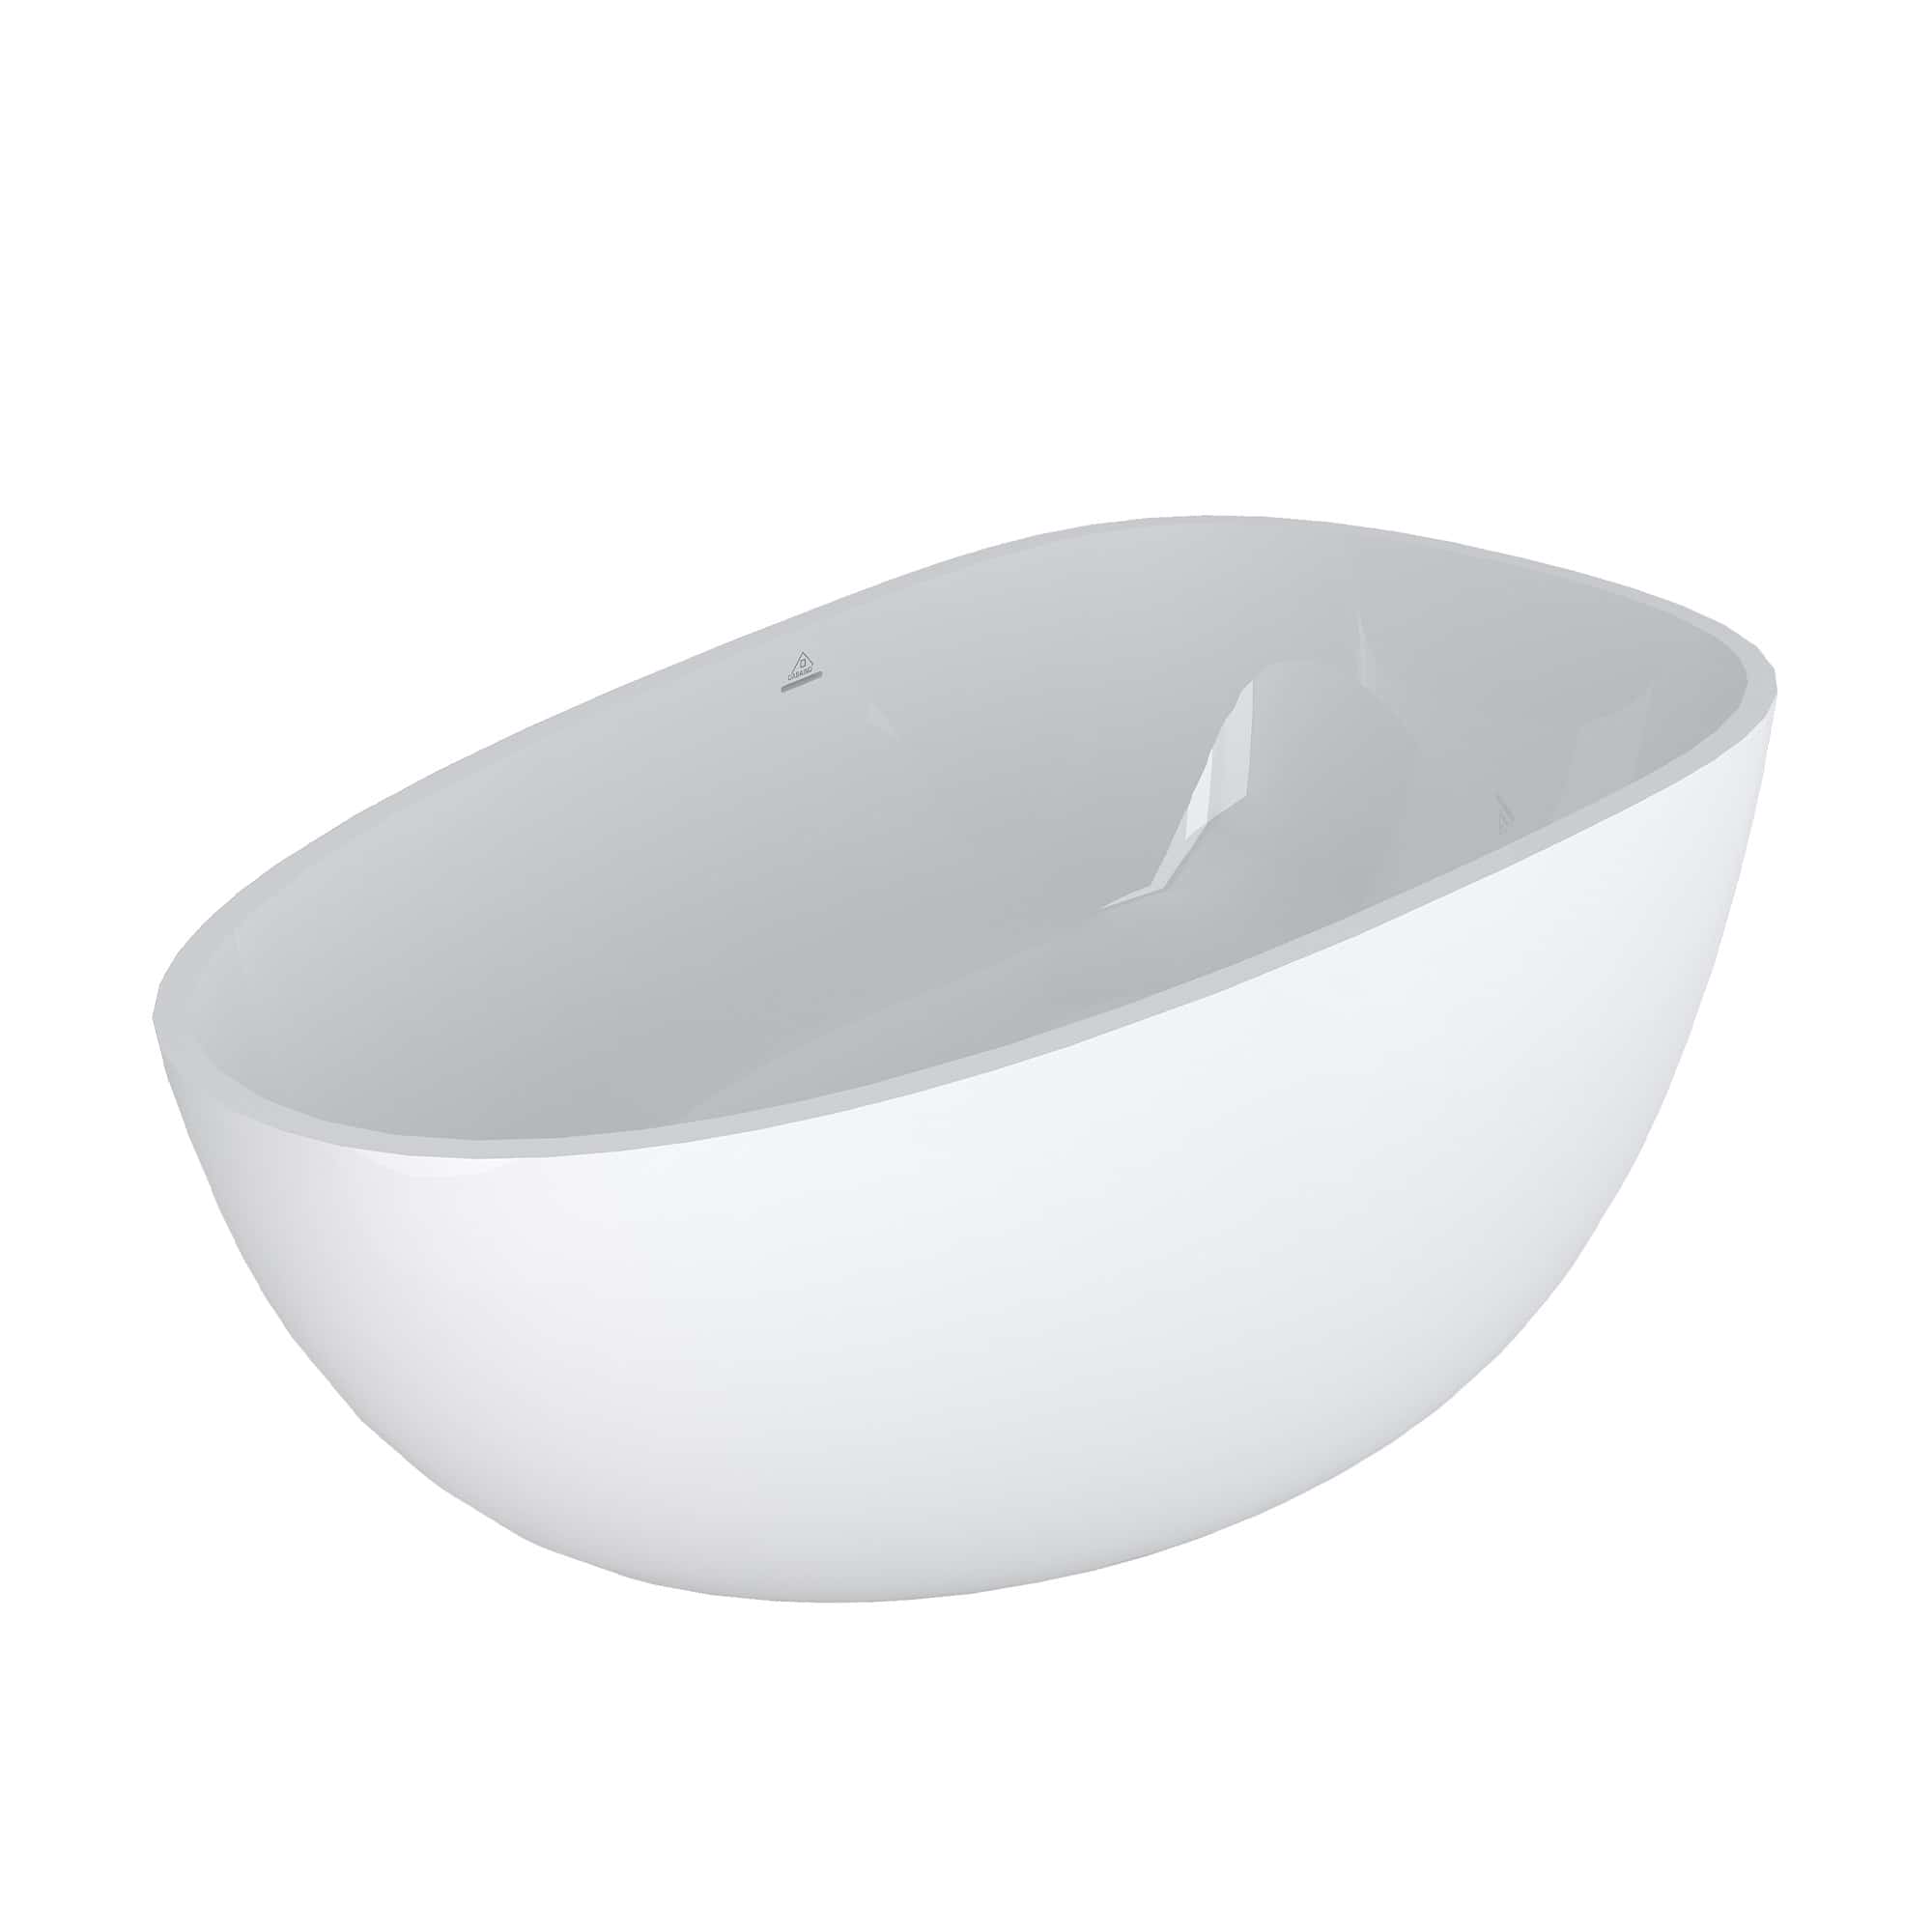 CASAINC 67 Inch Glossy White Freestanding Solid Surface Egg Shaped Soa